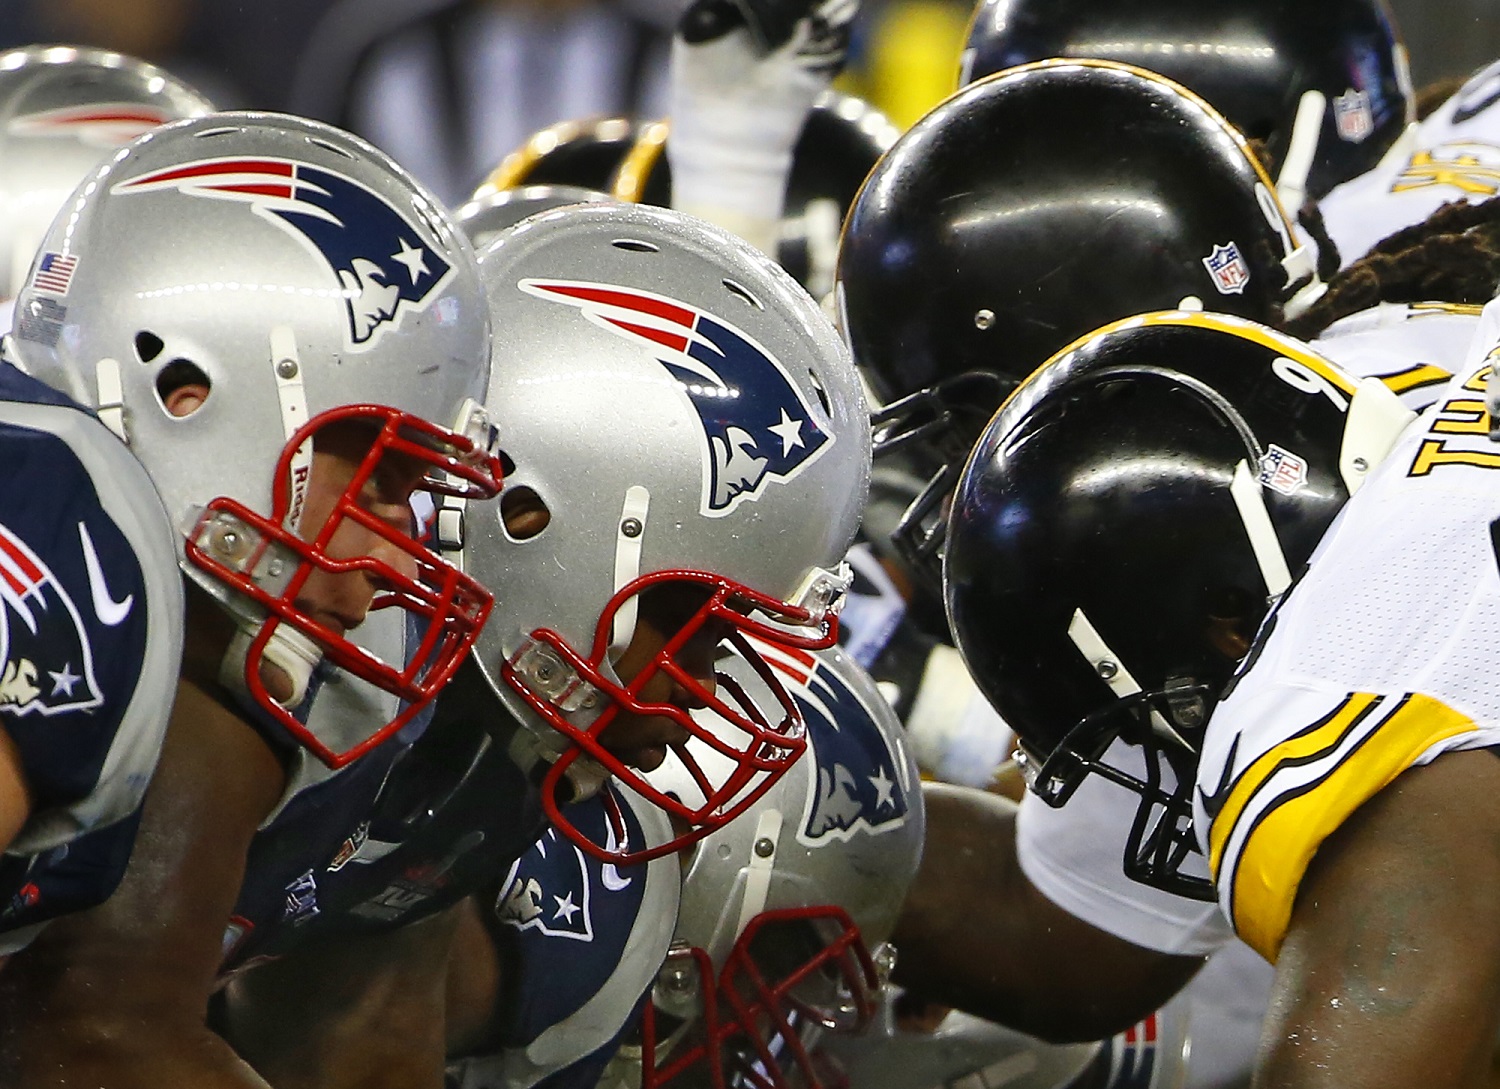 The New England Patriots and the Pittsburgh Steelers take the snap at the line of scrimmage in the second half of an NFL football game, Thursday, Sept. 10, 2015, in Foxborough, Mass. (AP Photo/Winslow Townson)